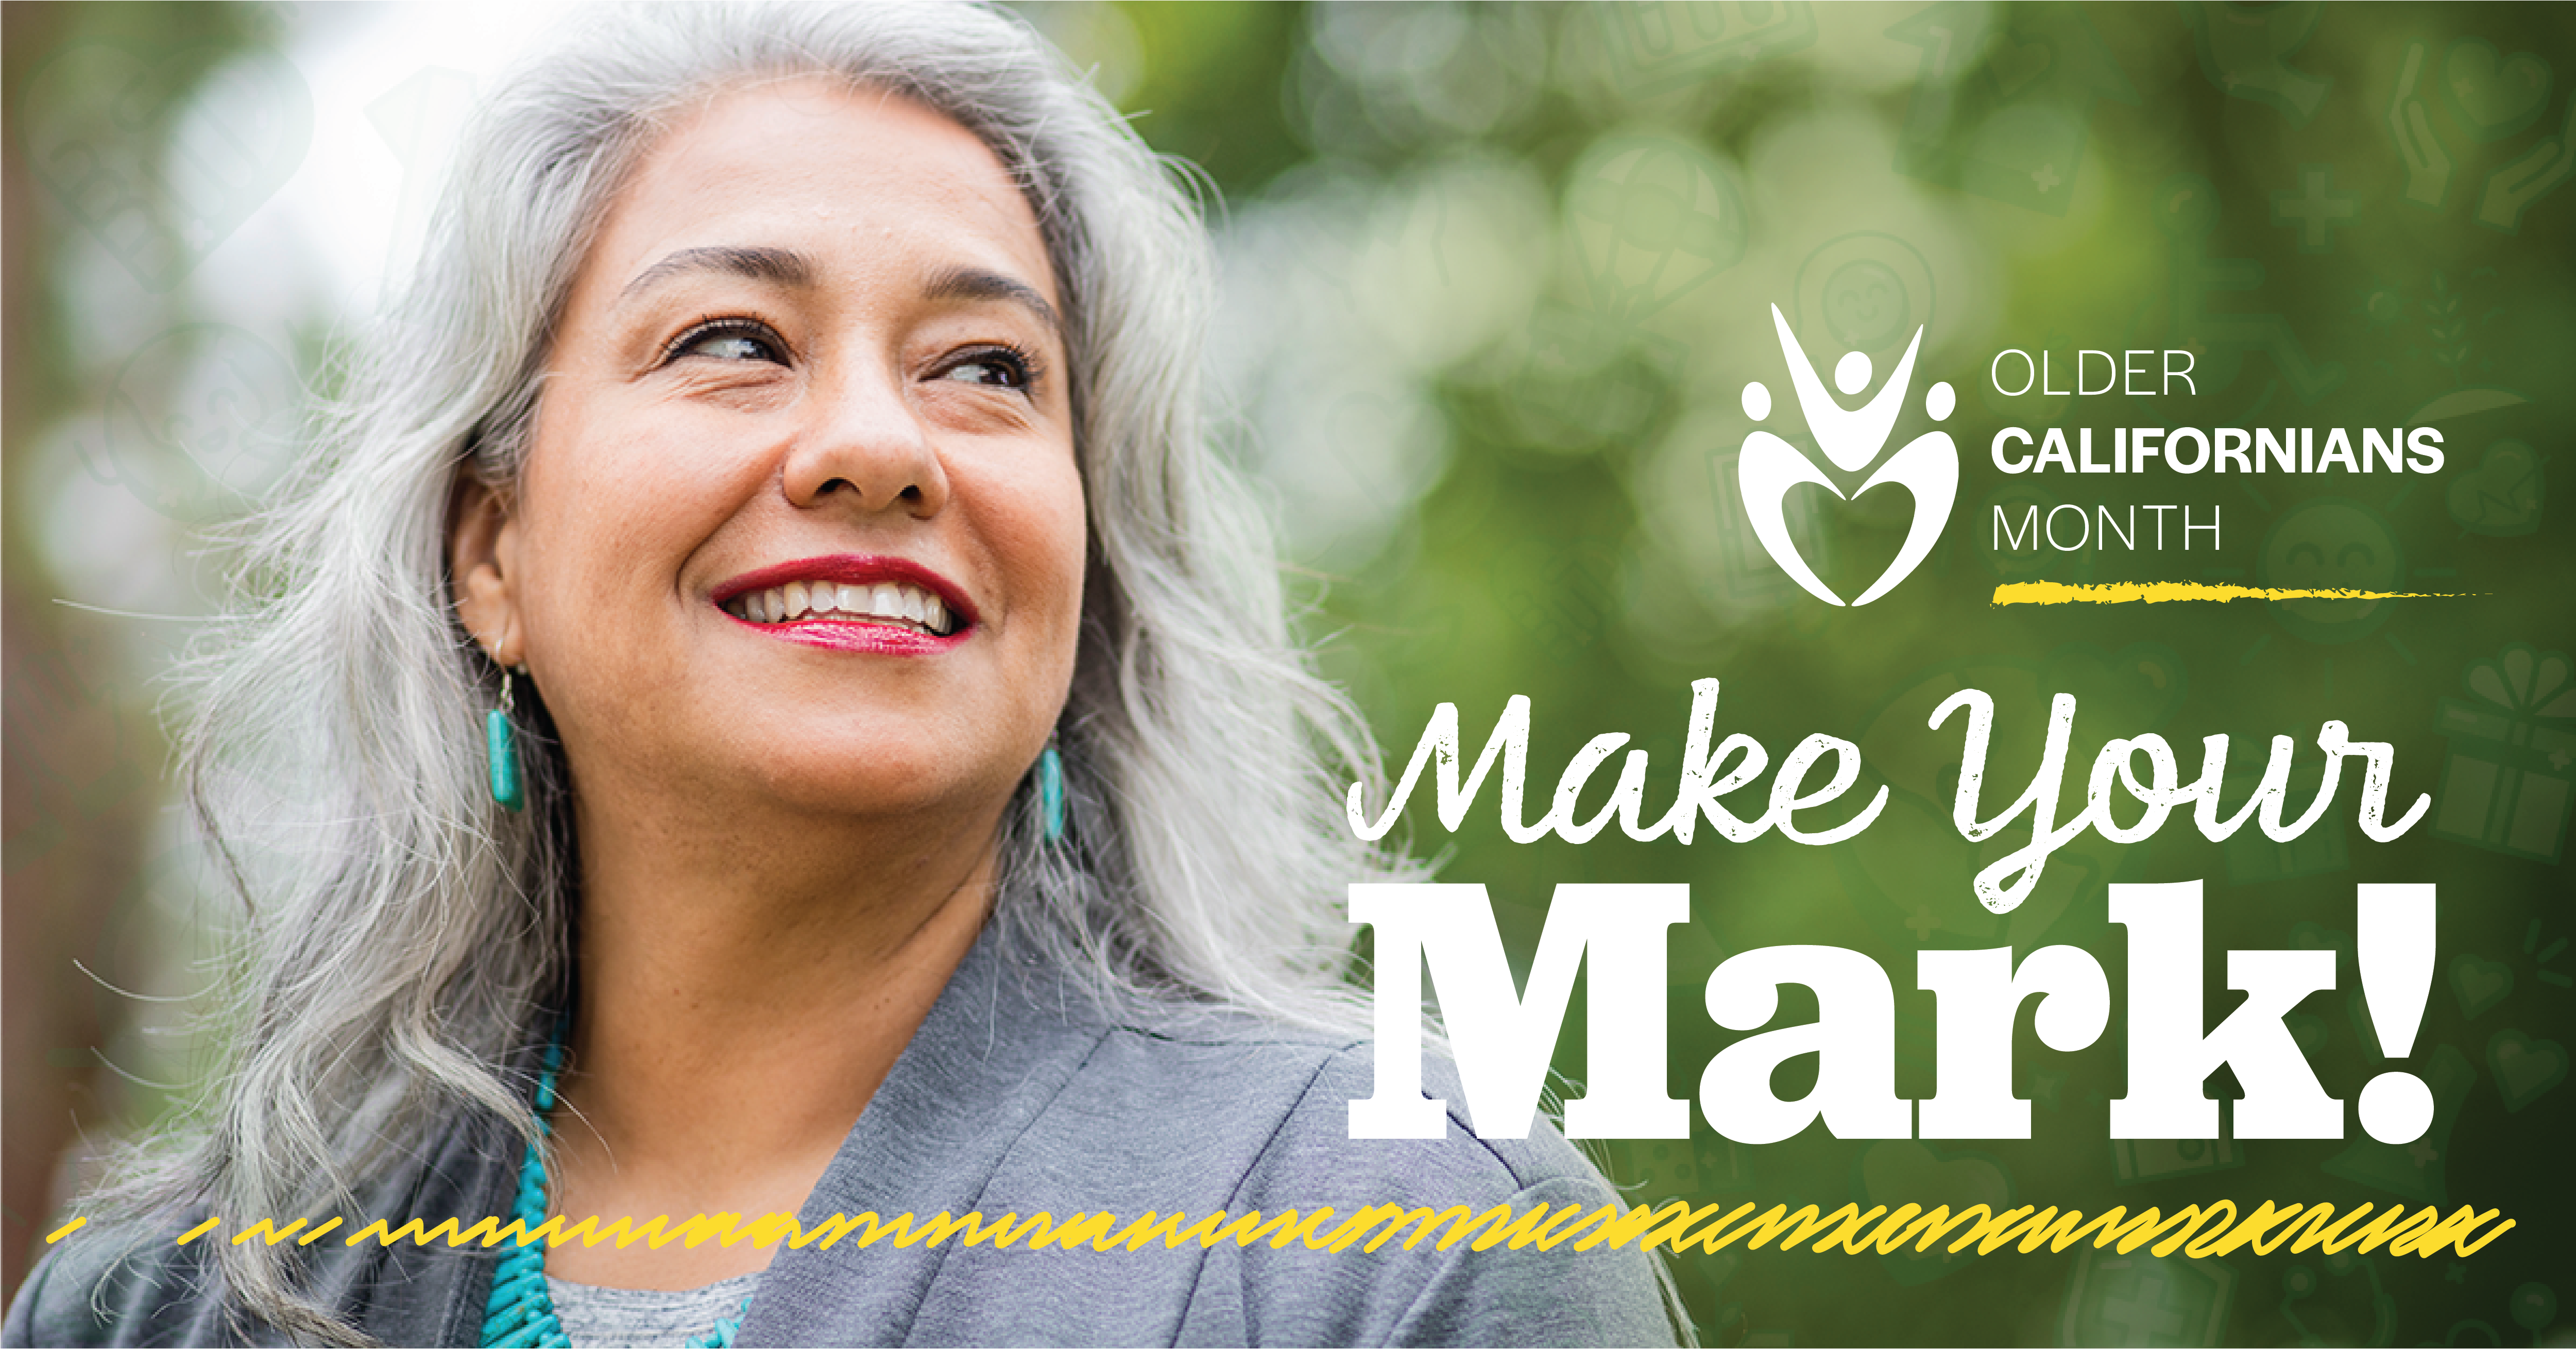 Older adult woman smiling with text Older Californians Month Make Your Mark!